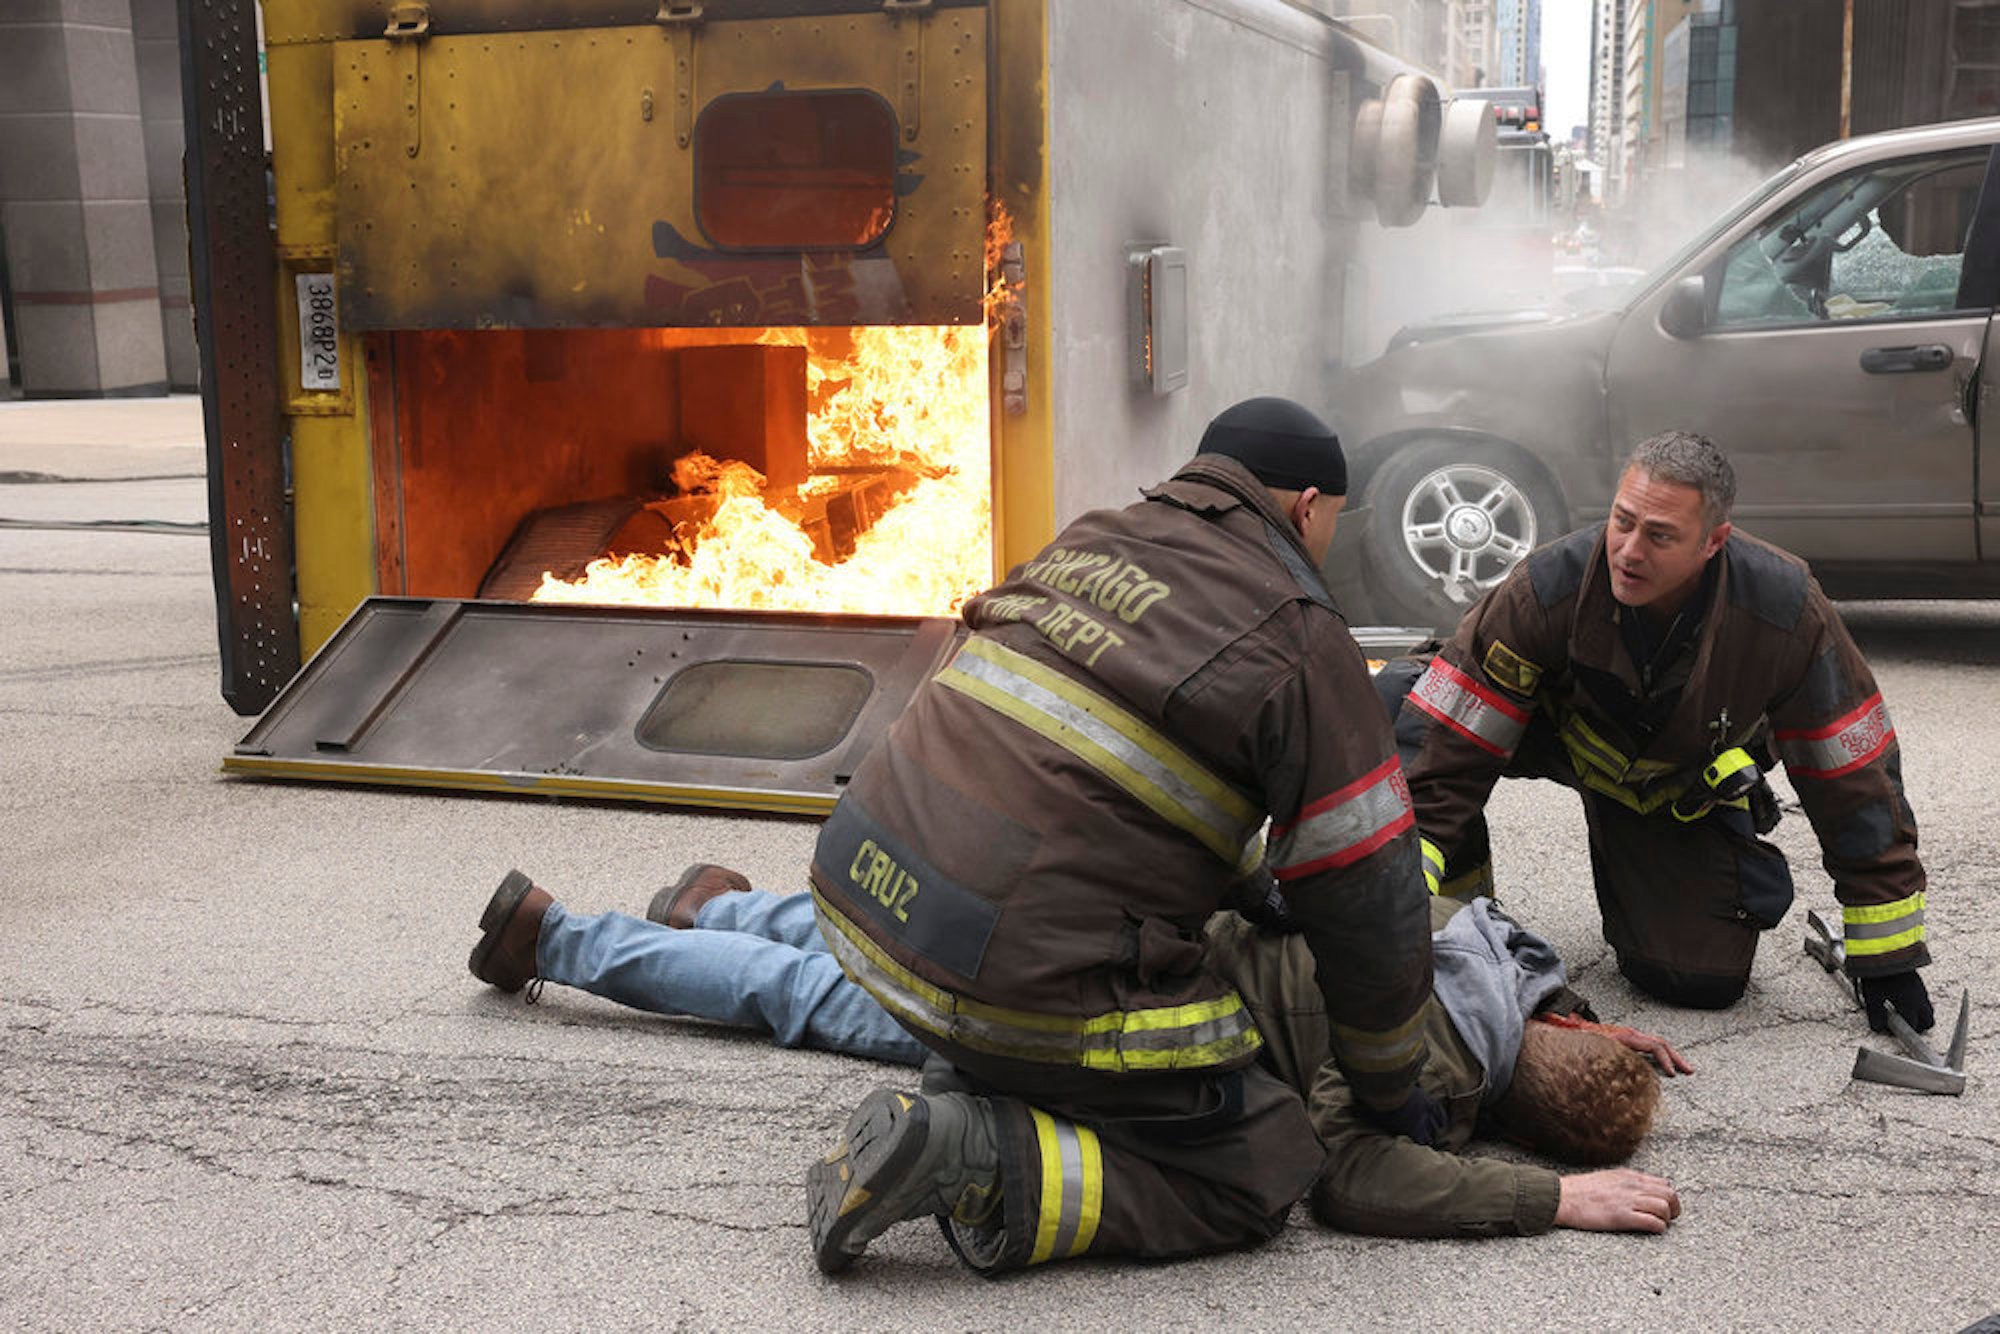 Joe Cruz and Kelly Severide responding to a fire in 'Chicago Fire' Season 10 Episode 21